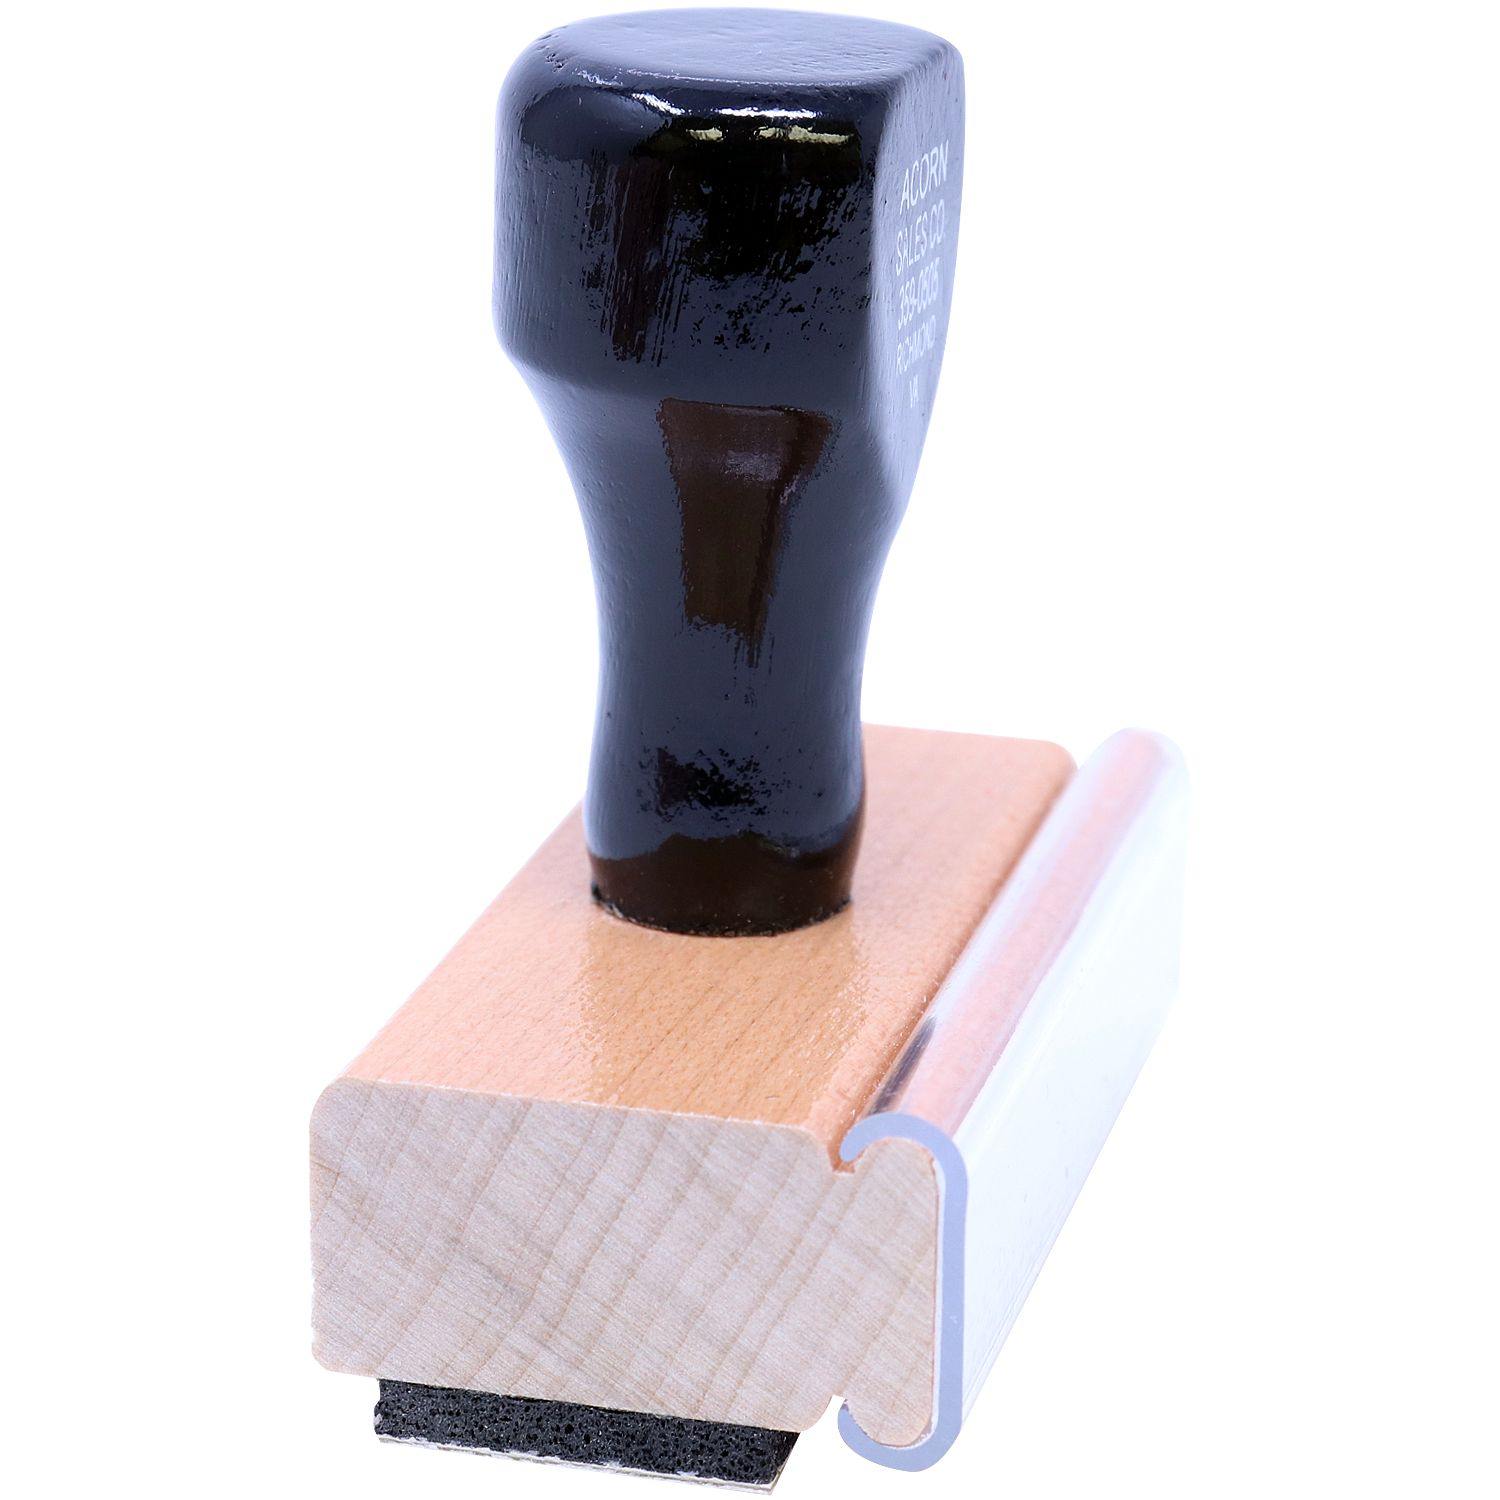 Side View of Large Narrow Font Duplicate Rubber Stamp at an Angle